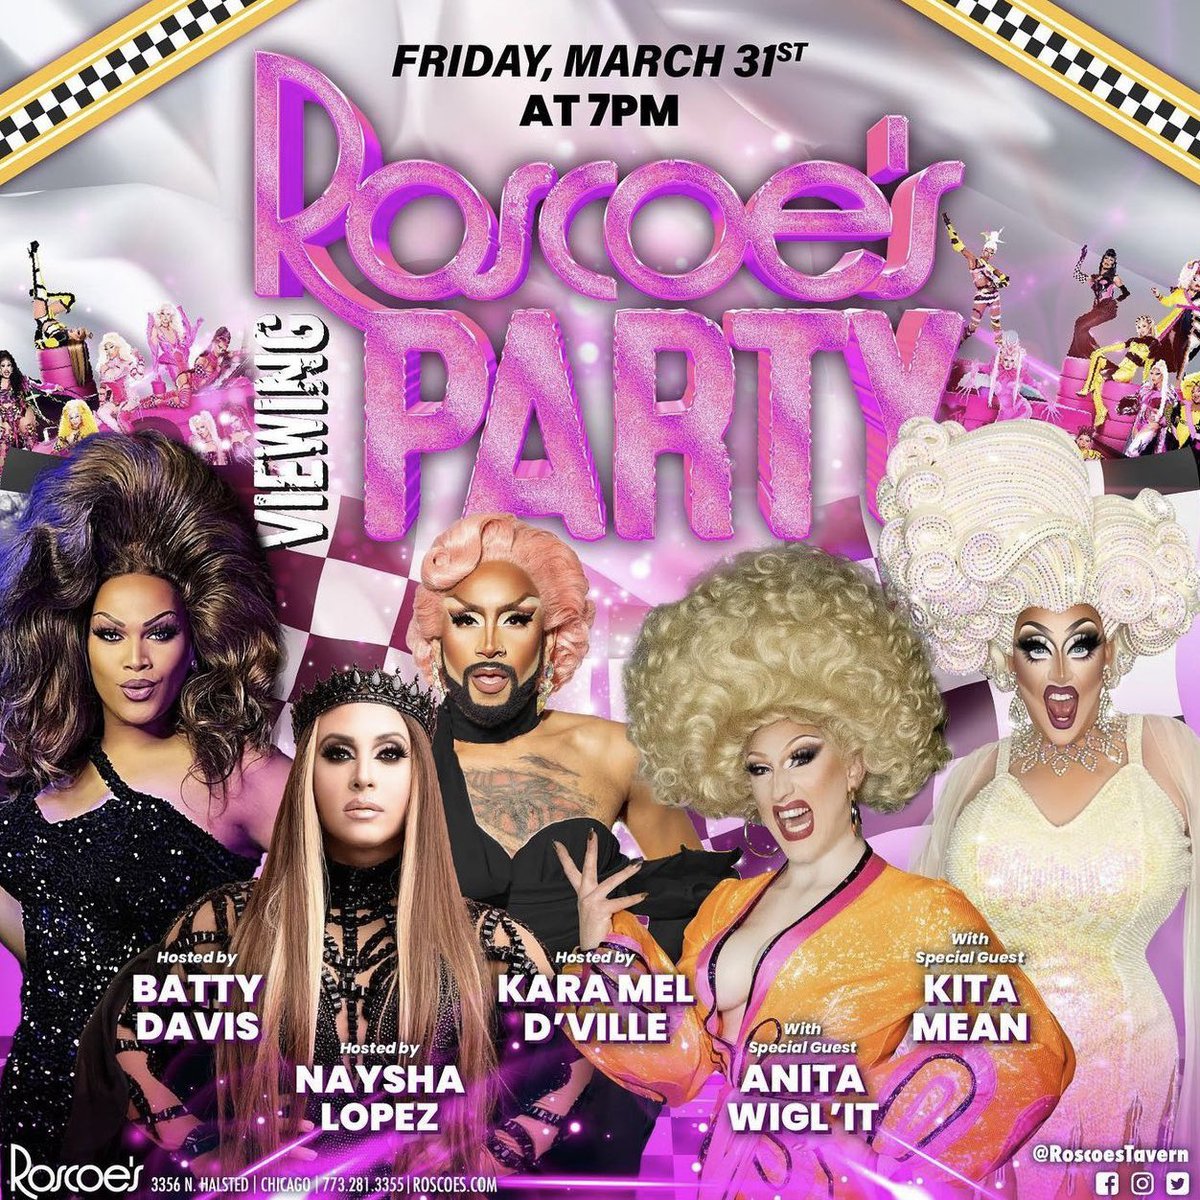 Chicago! I’m coming! 😍😍😍 I couldn’t be more excited for @Roscoestavern with @KitaMean !!